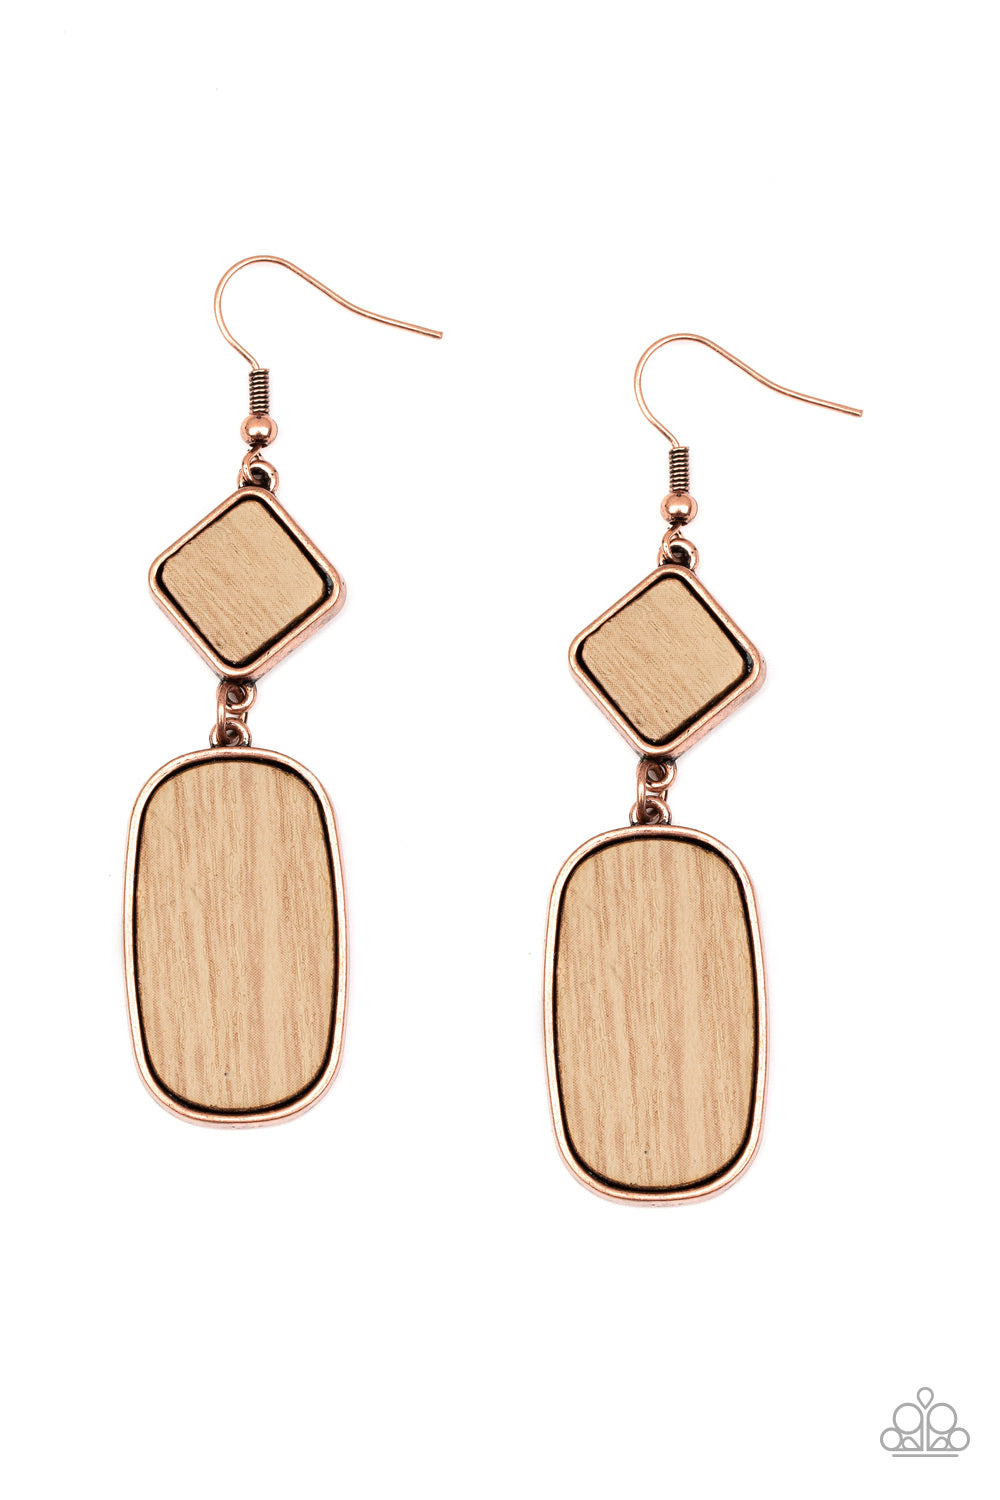 You WOOD Be So Lucky - Copper Earrings